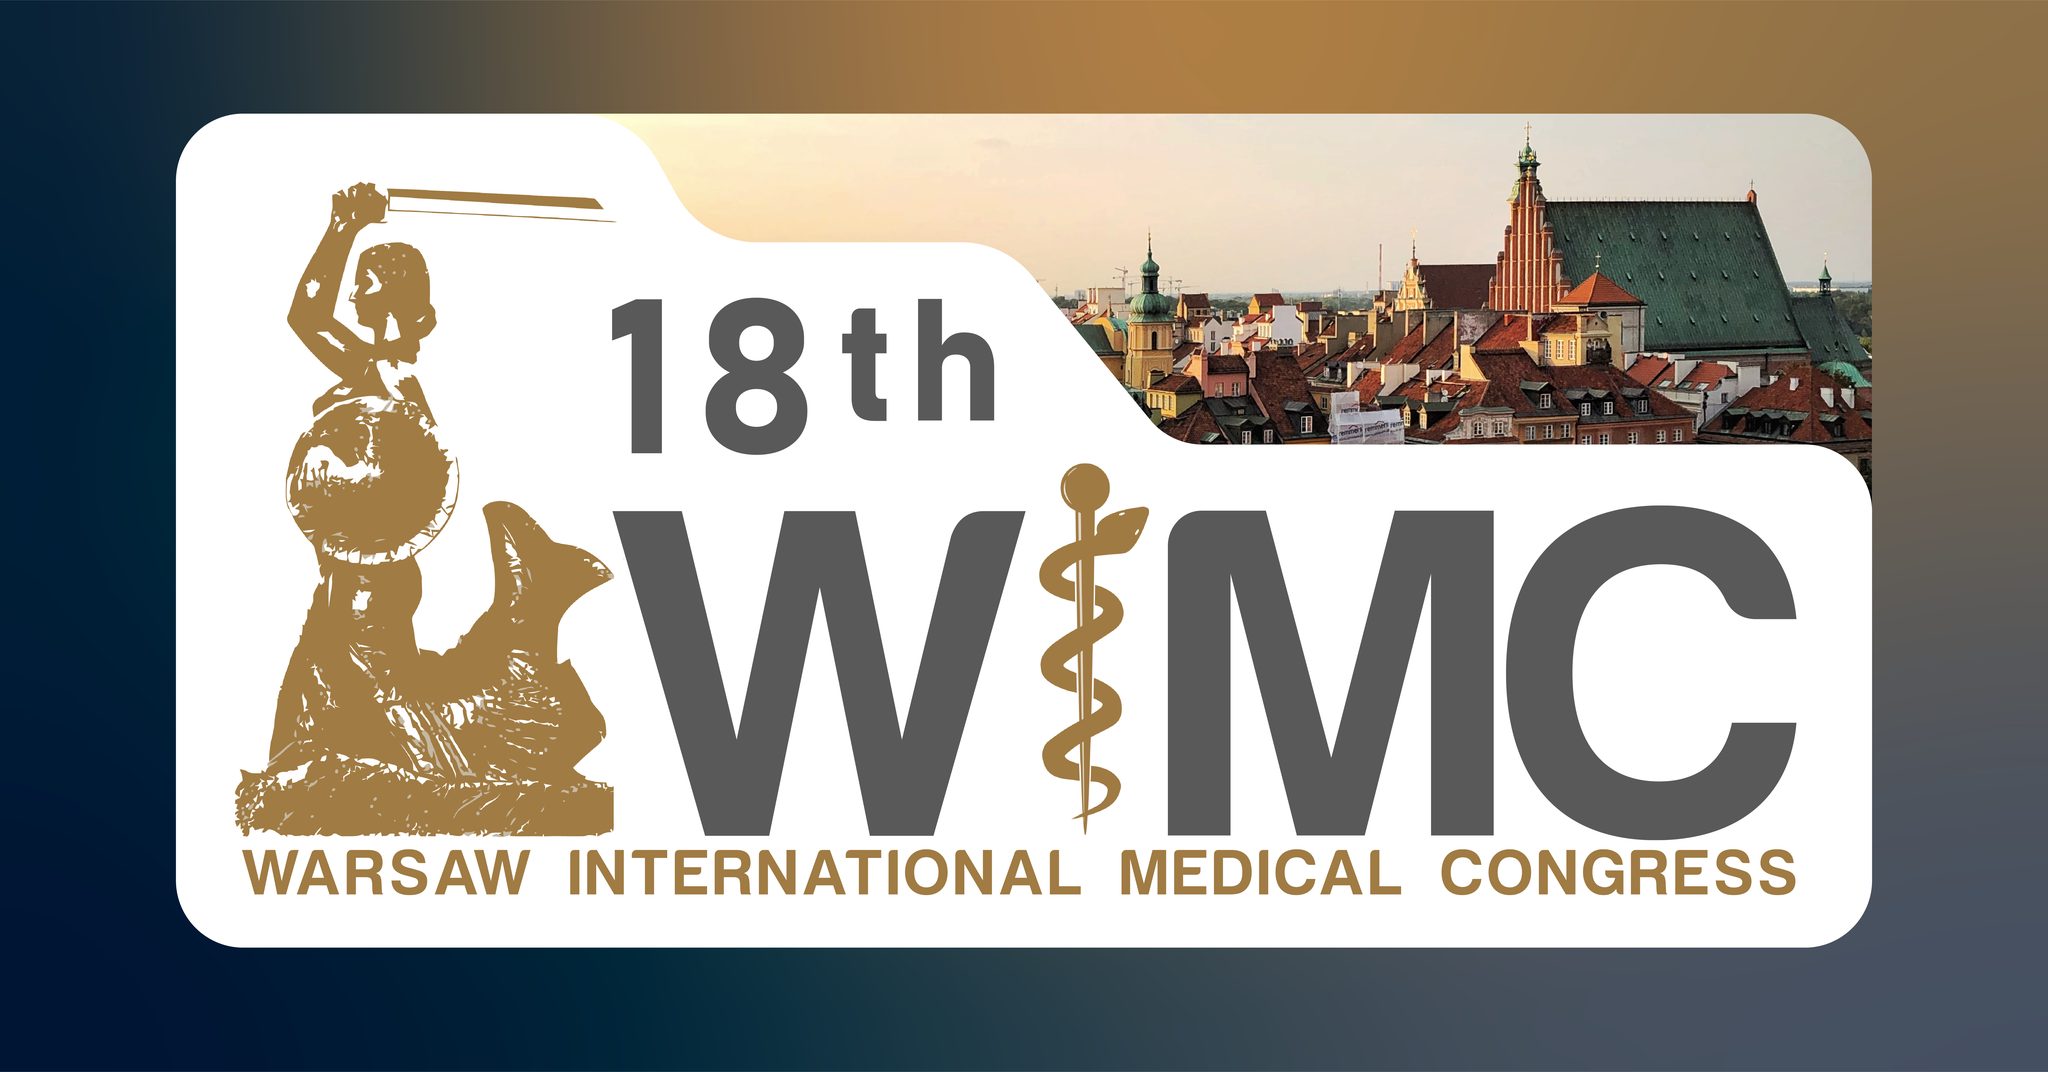 Are you a young scientist? Present your research results at the WIMC International Congress